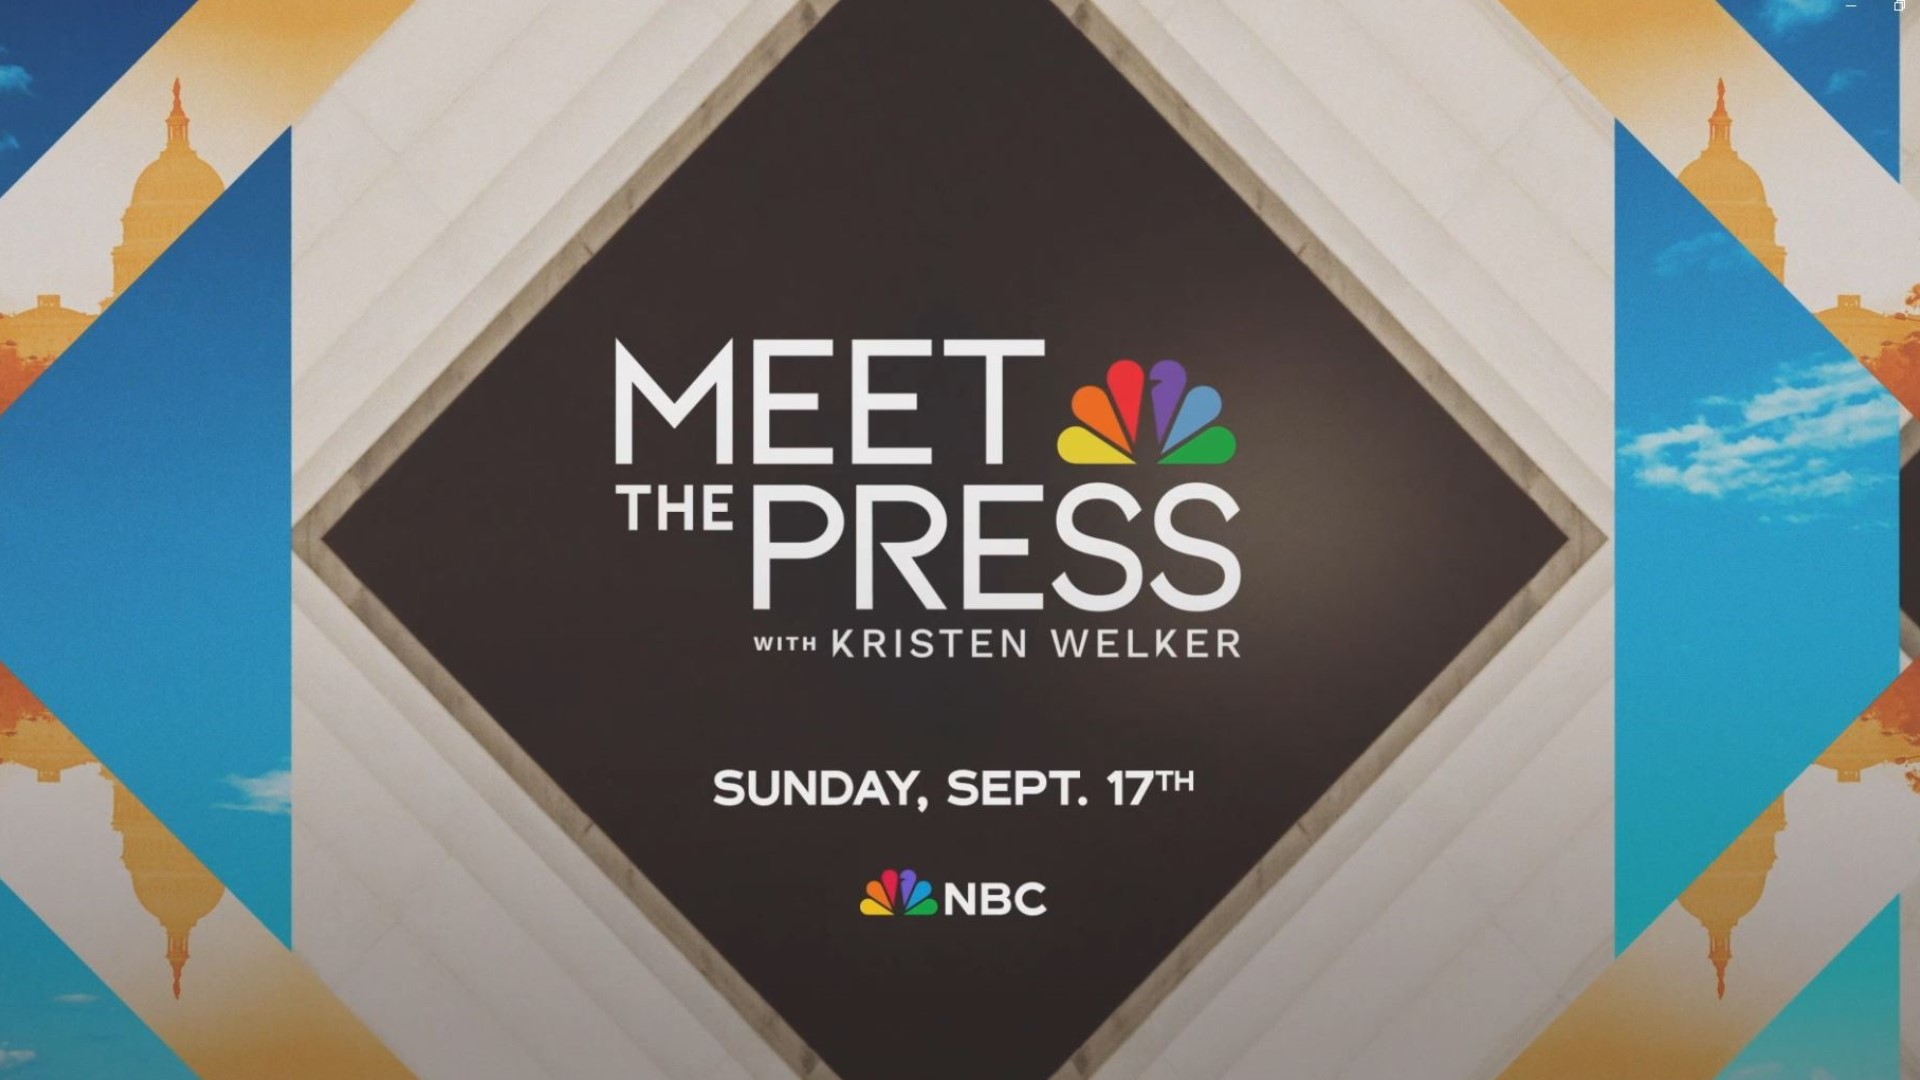 The inaugural broadcast of Meet the Press with Kristen Welker will feature an exclusive interview with former President Donald Trump on Sunday, Sept. 17, 2023.